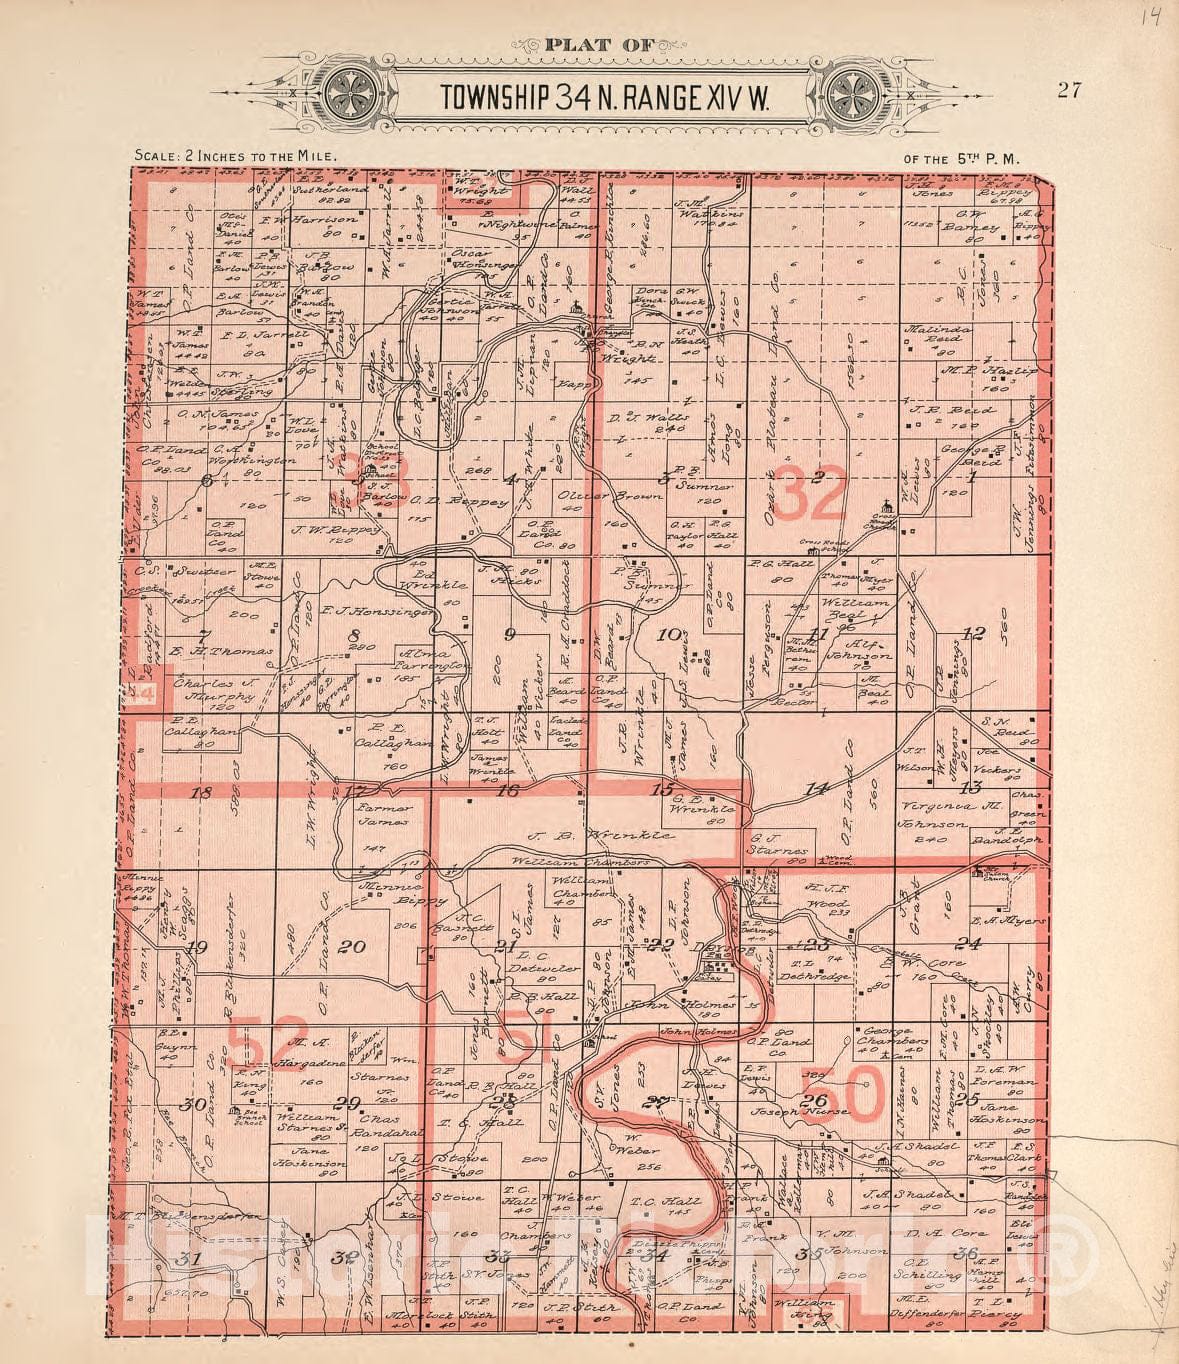 Historic 1912 Map - Plat Book of La Clede County, Missouri : containing maps of Villages, Cities and townships of The County, and of The State - North Part of City of Lebanon